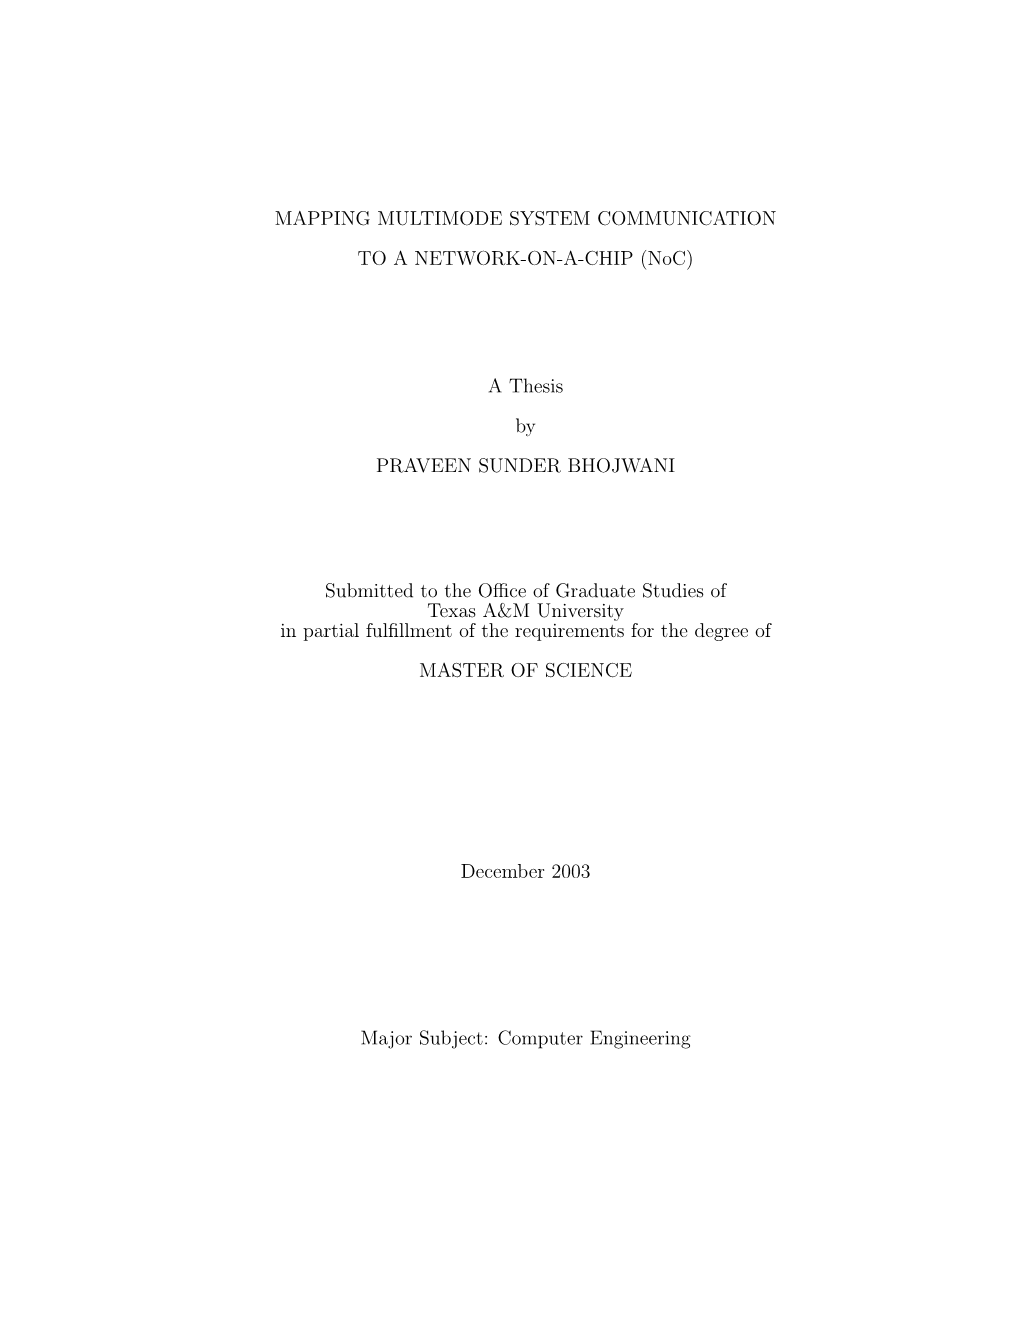 MAPPING MULTIMODE SYSTEM COMMUNICATION to a NETWORK-ON-A-CHIP (Noc) a Thesis by PRAVEEN SUNDER BHOJWANI Submitted to the Office